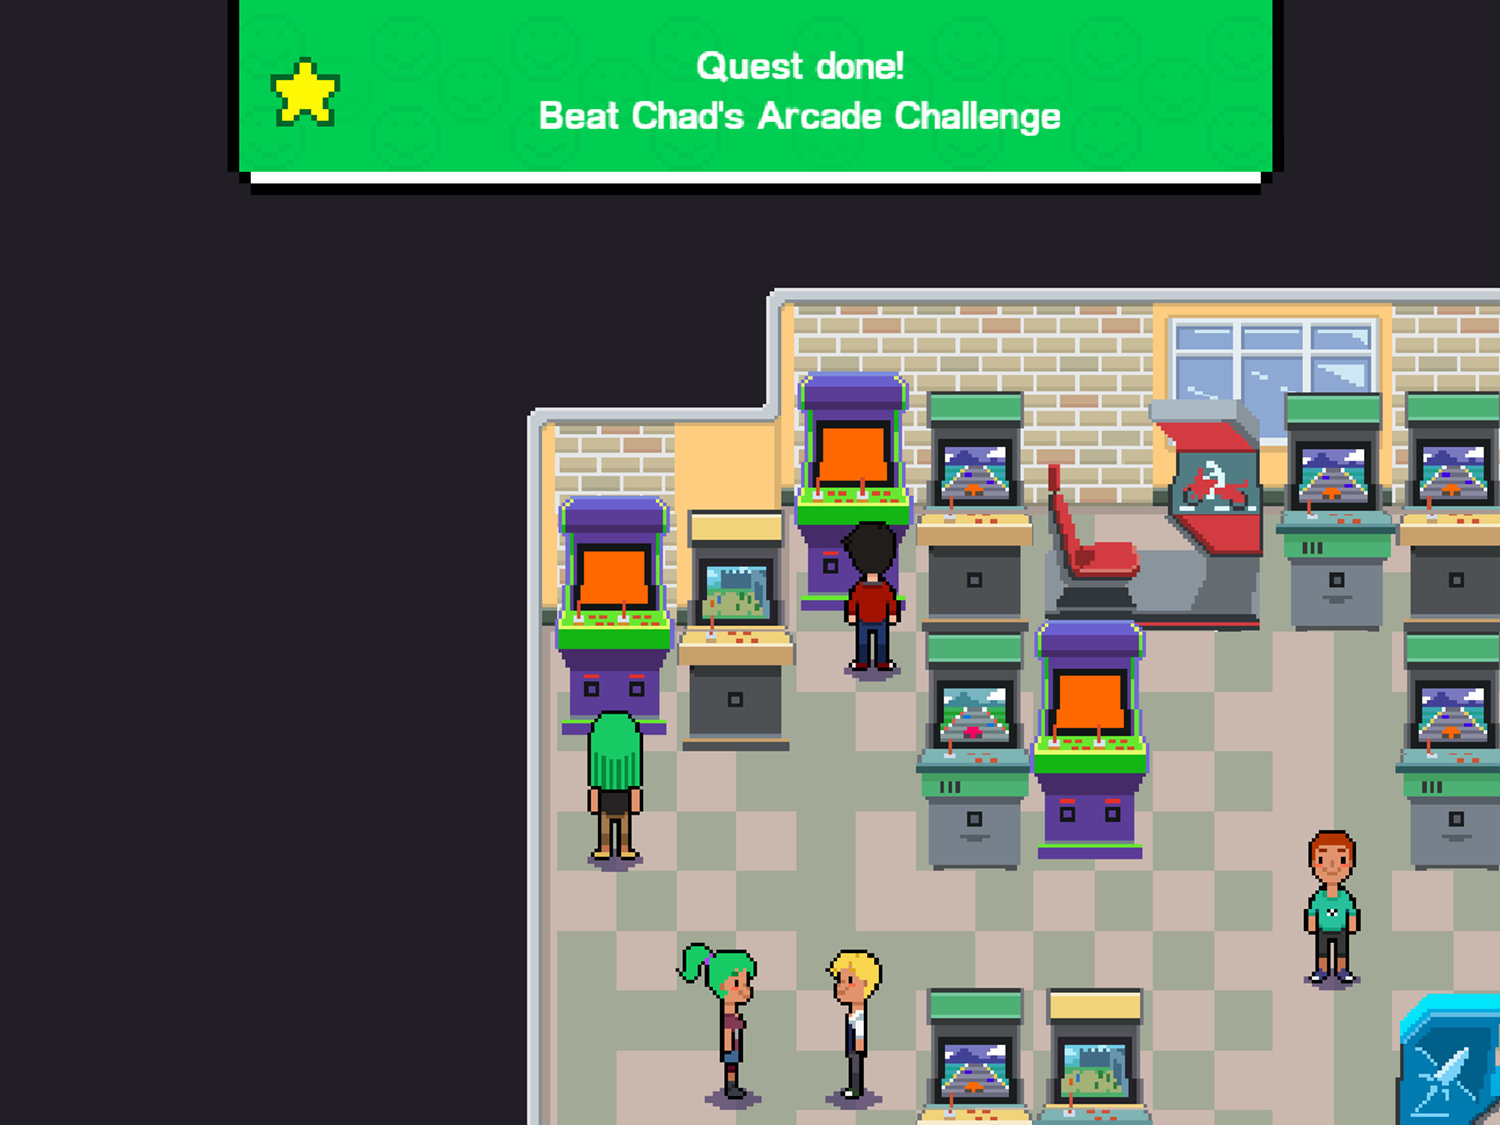 Gamer's Guide How to Win at High School Game Quest Done Screenshot.